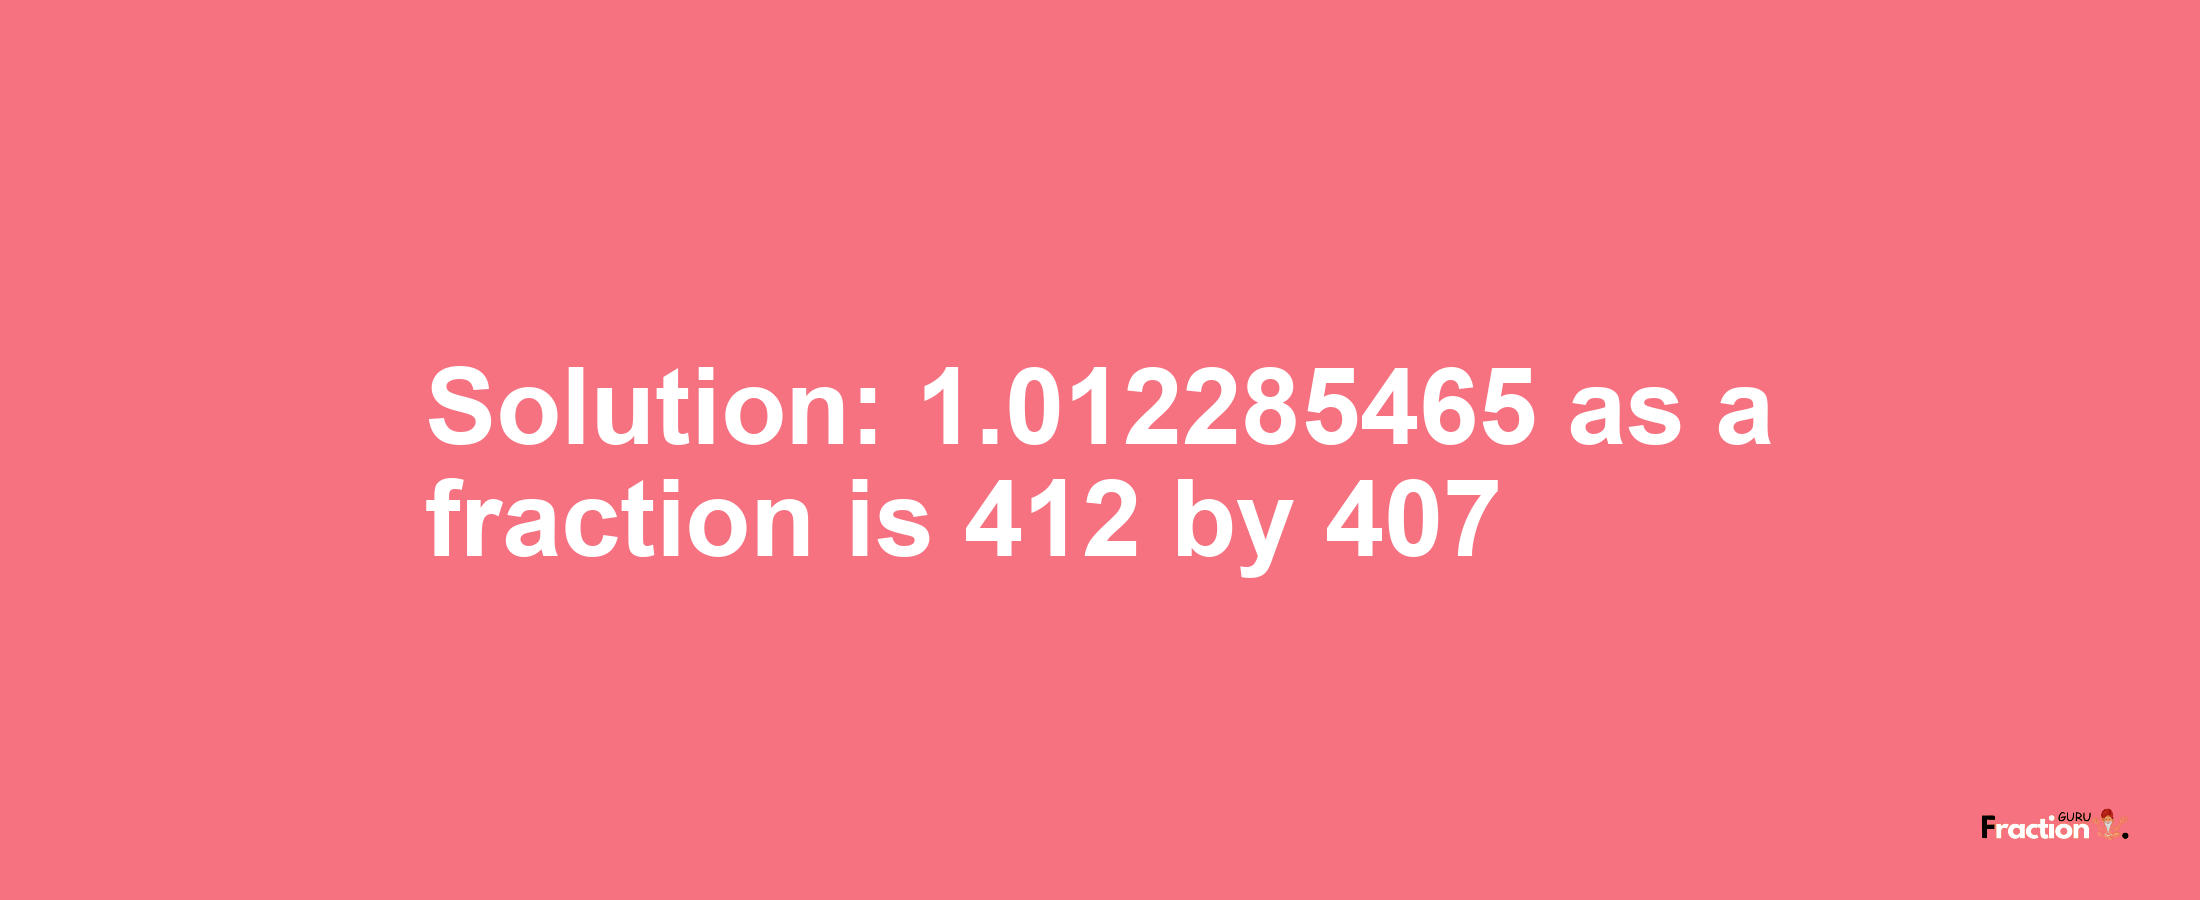 Solution:1.012285465 as a fraction is 412/407